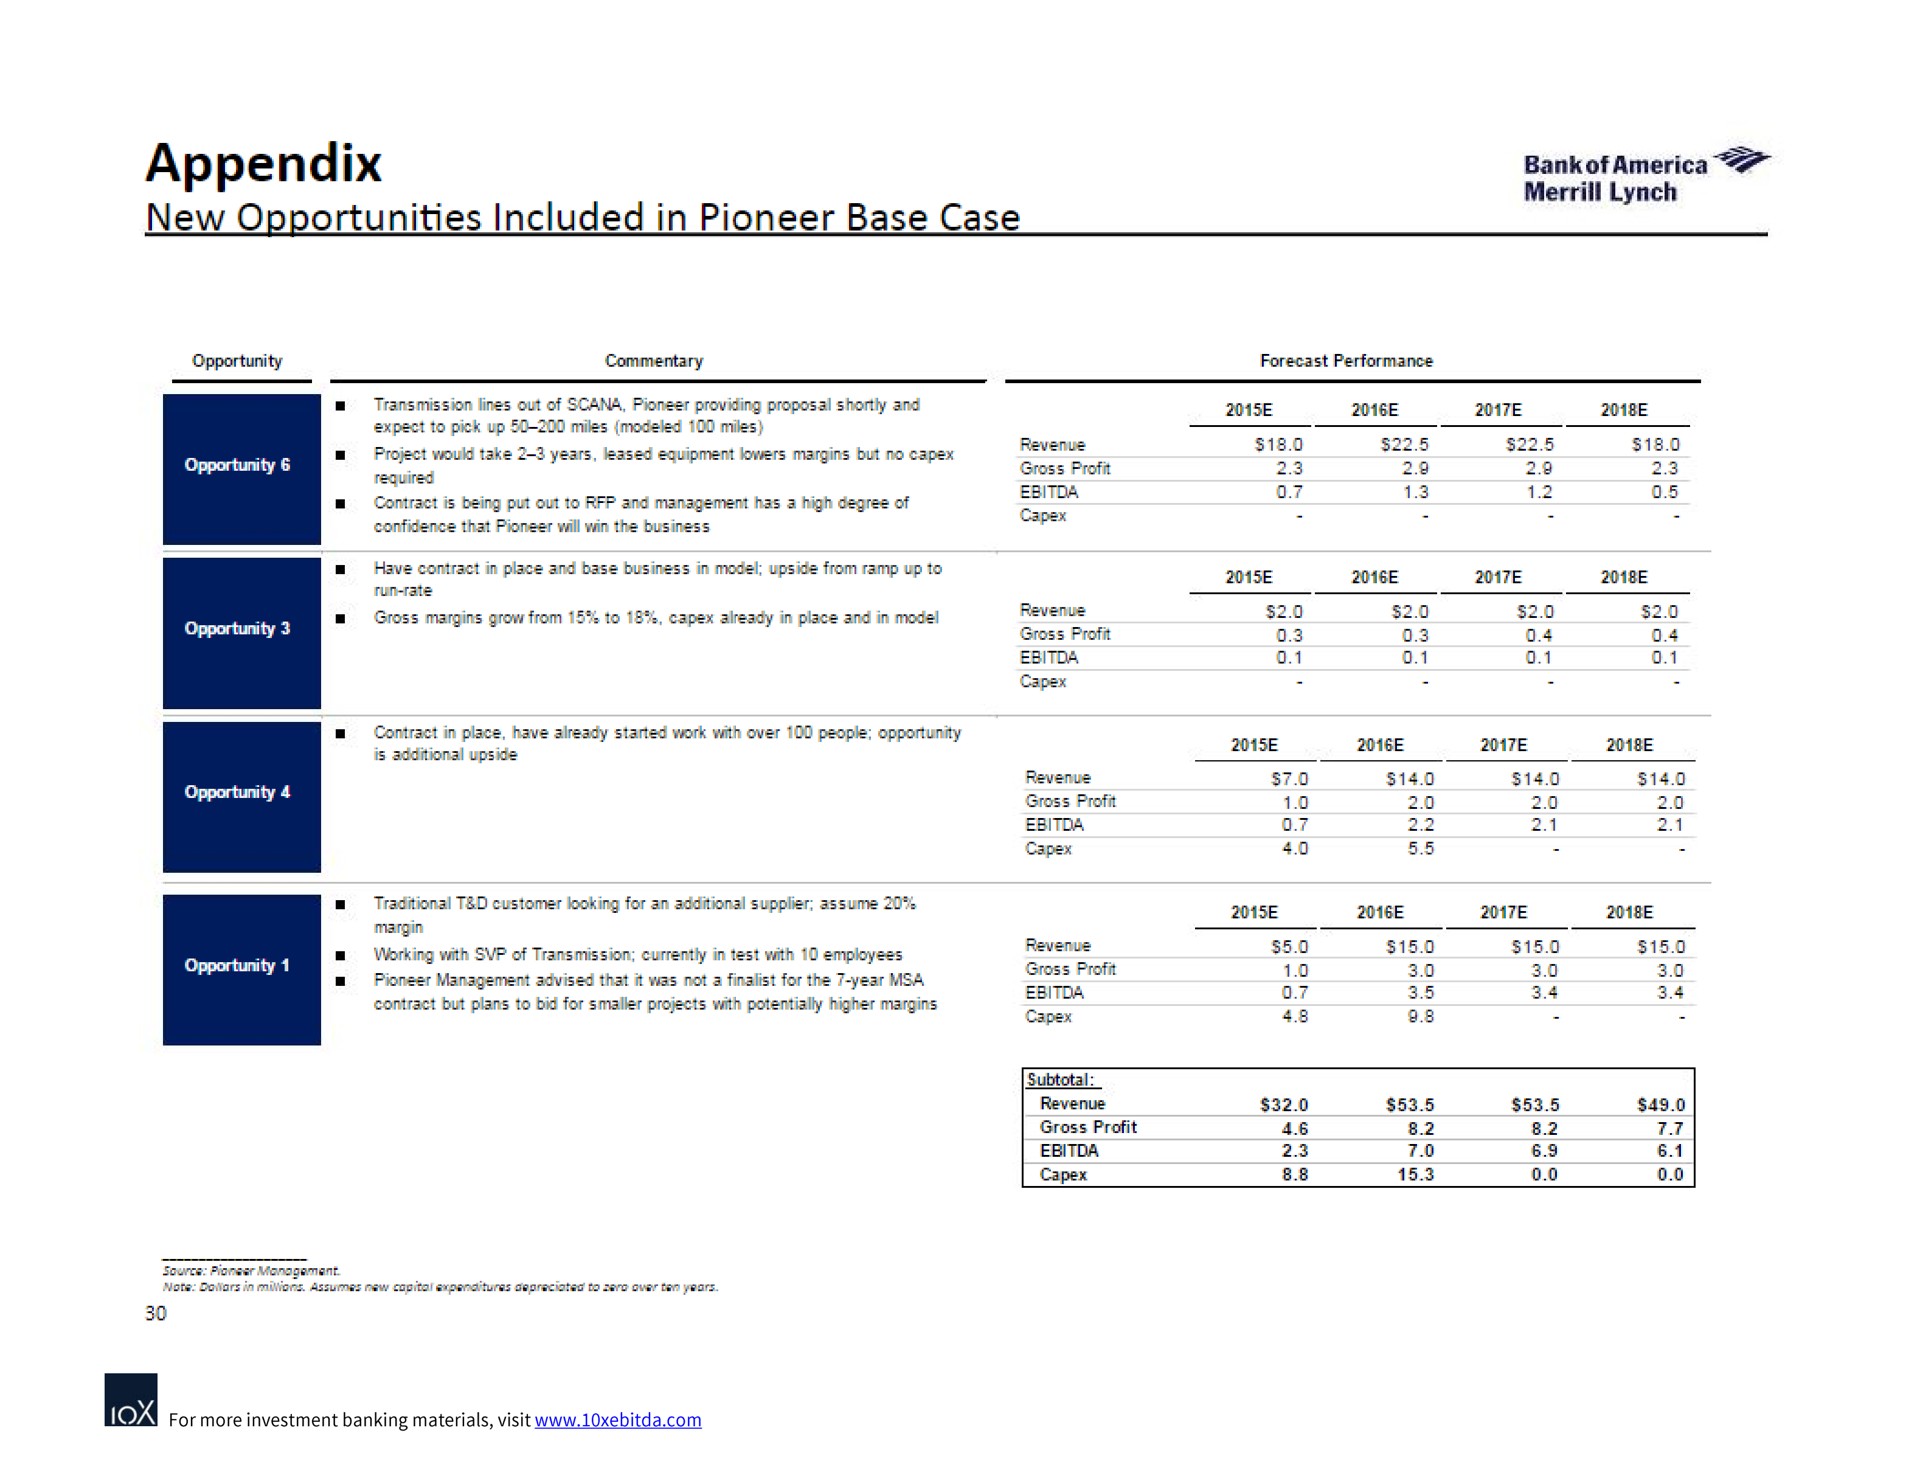 appendix new opportunities included in pioneer base case | Bank of America